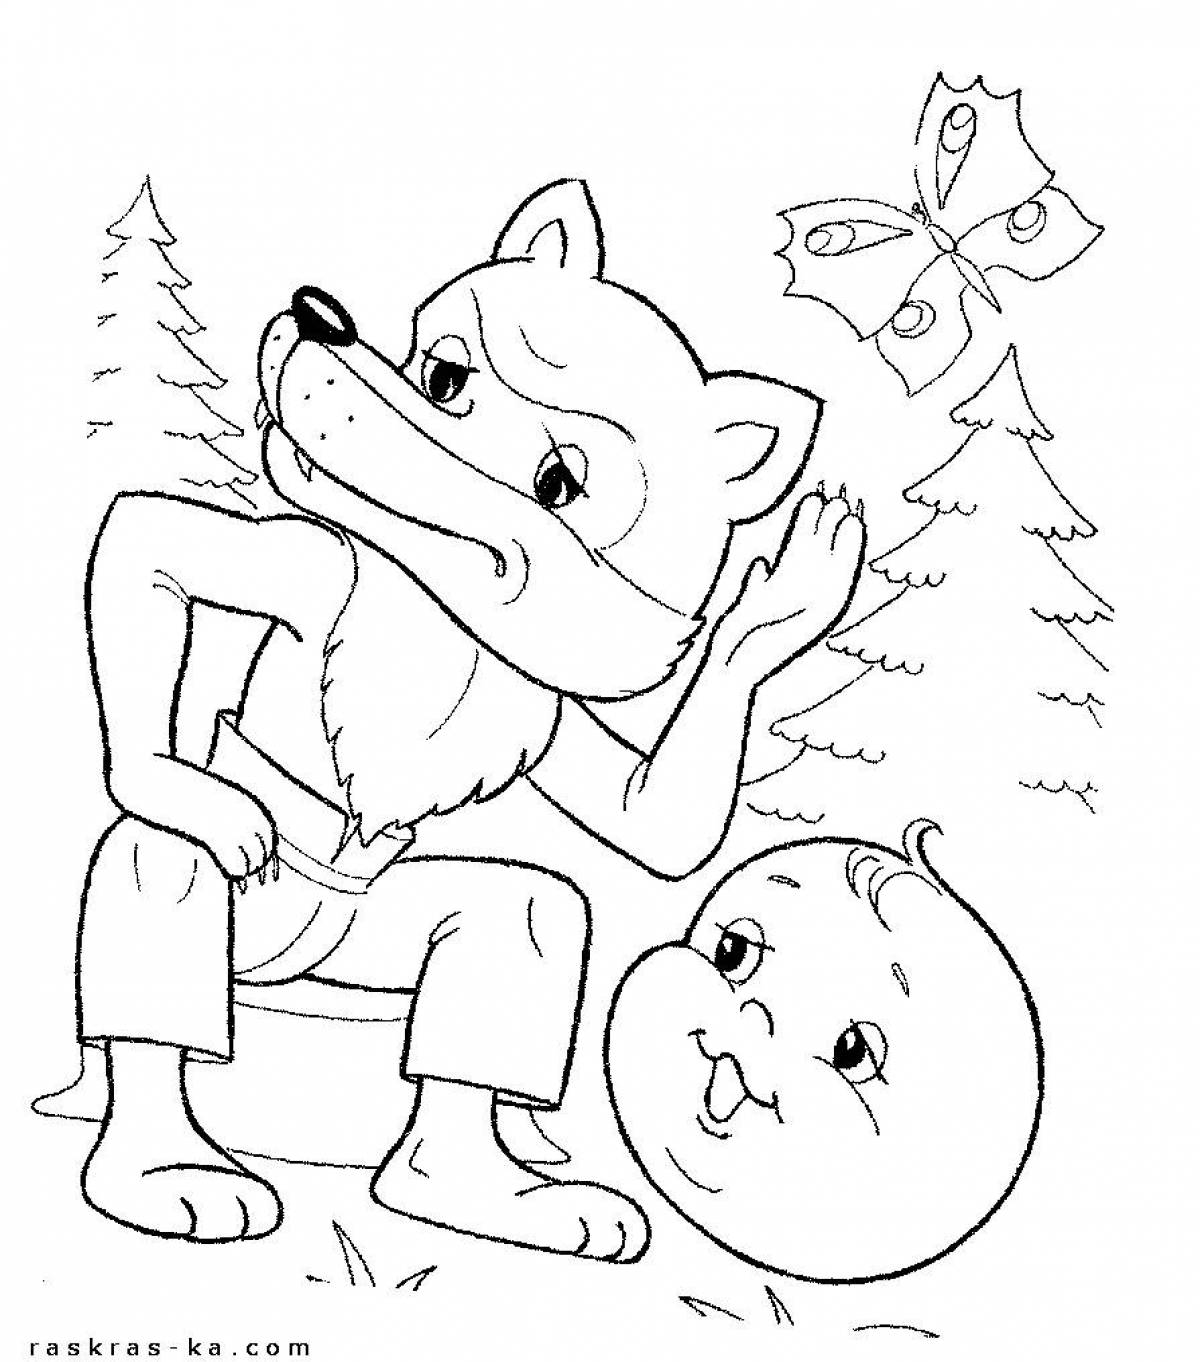 Fun fairy tale coloring pages